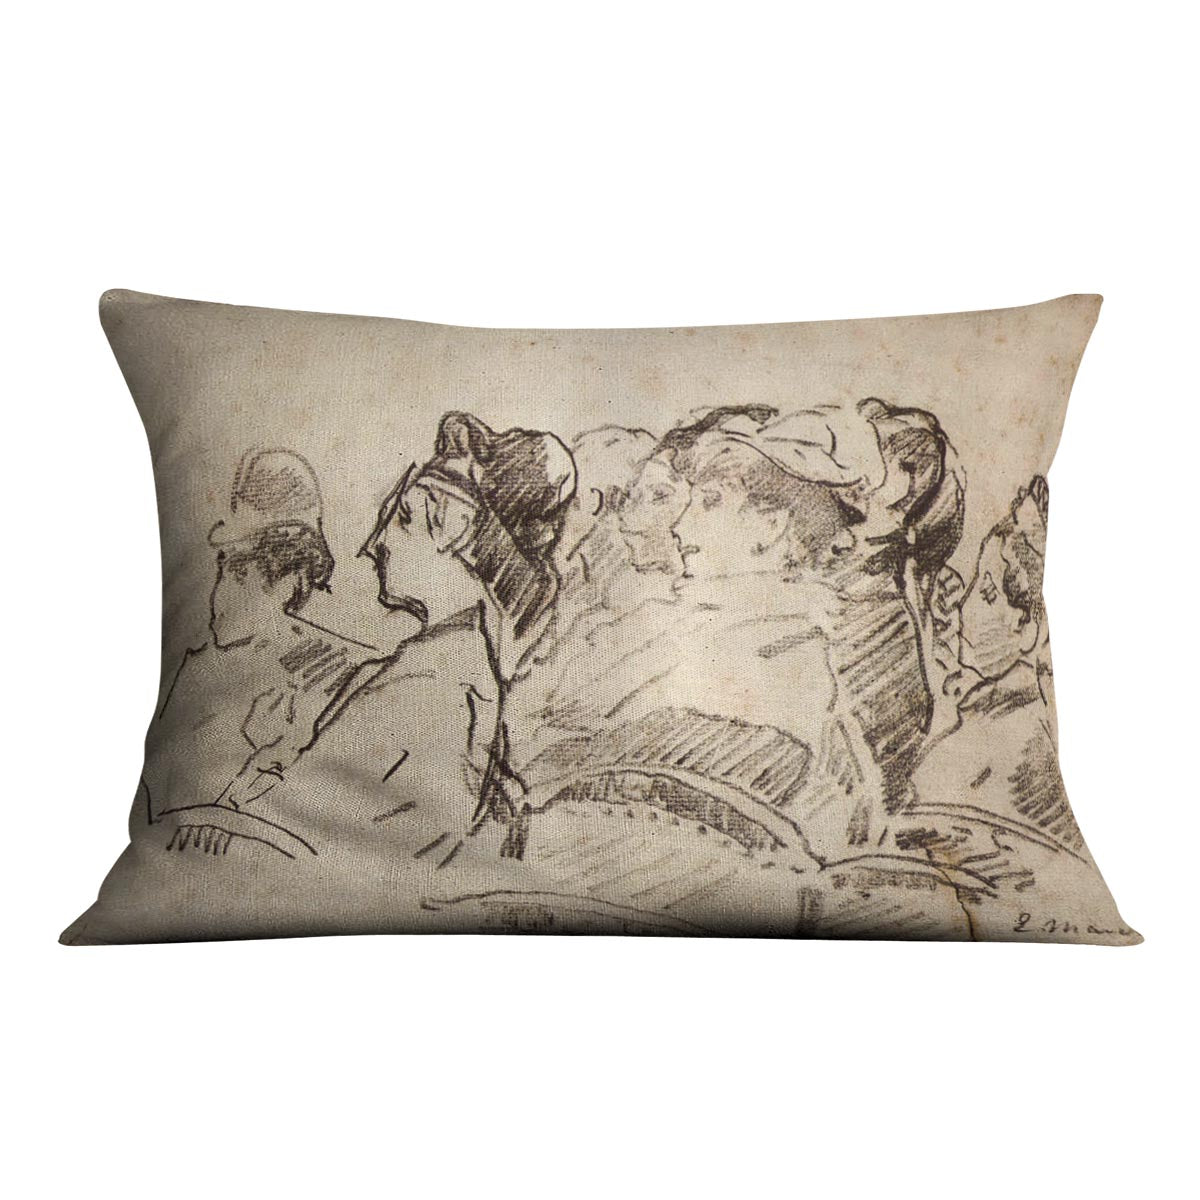 At the Theater by Manet Cushion